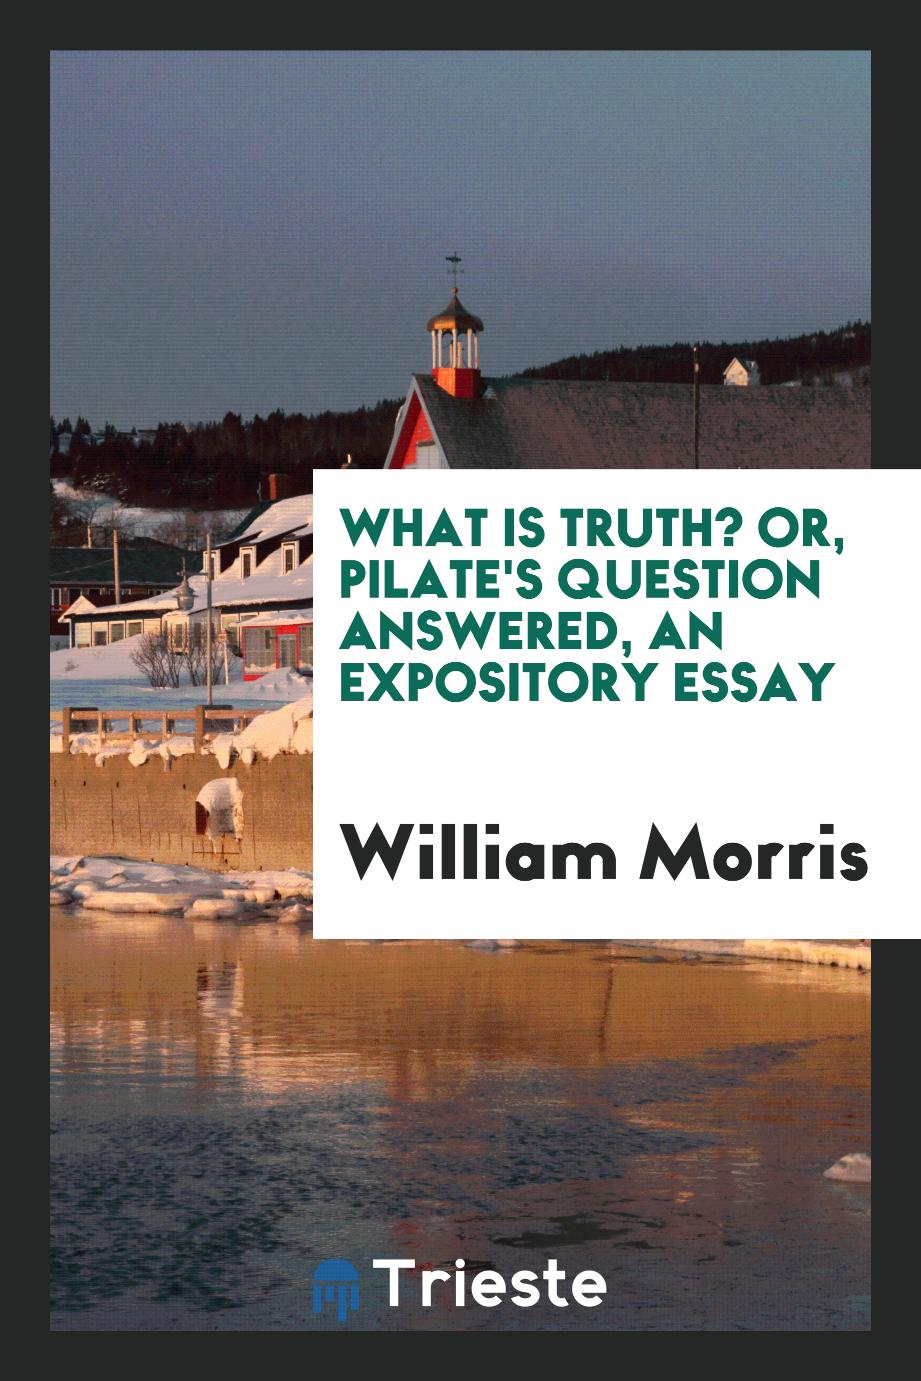 What is truth? Or, Pilate's question answered, an expository essay